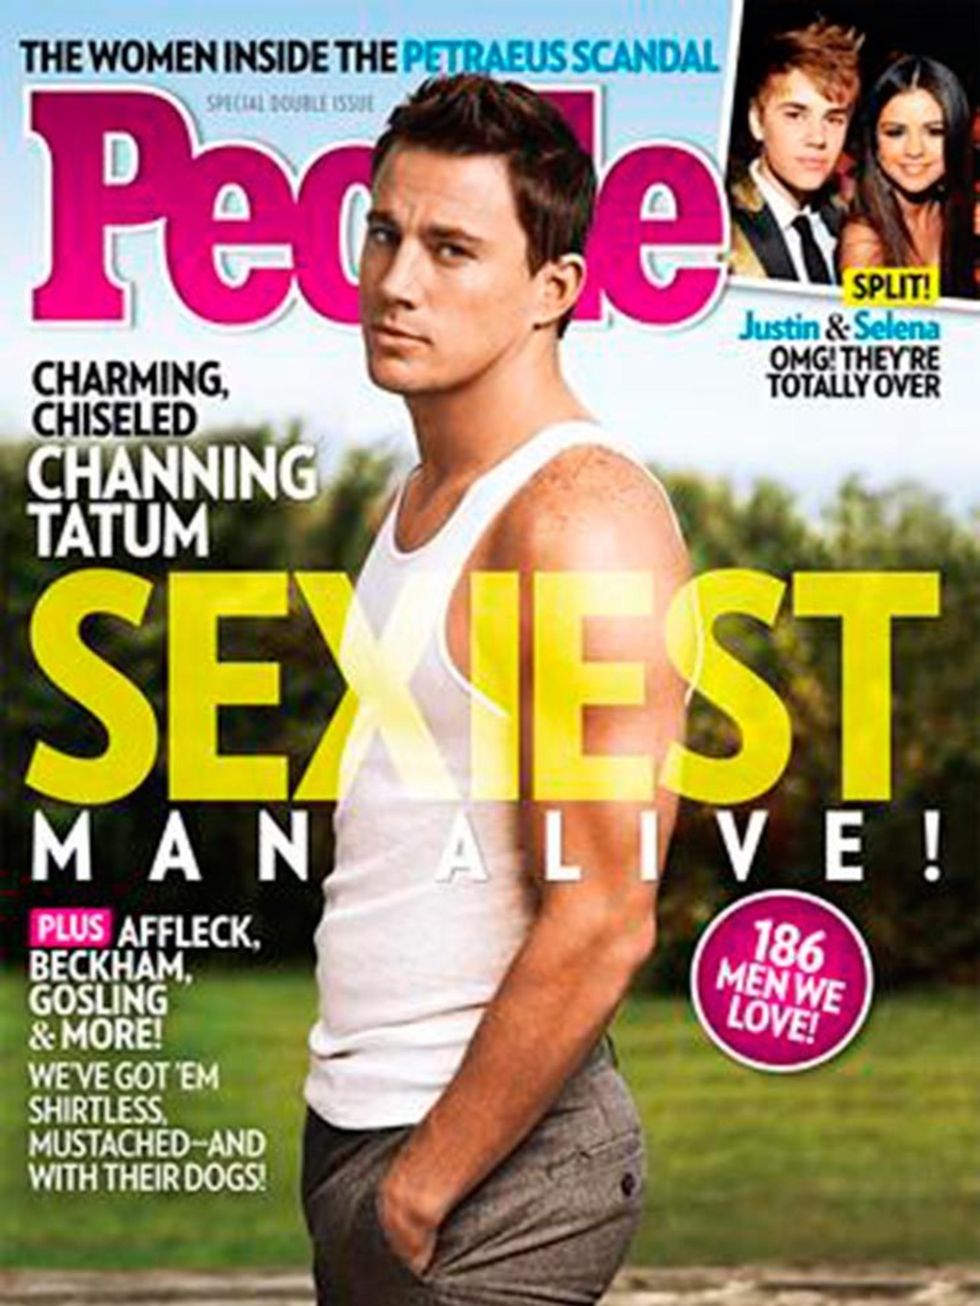 <p>The beefcake that is Channing Tatum muscles in to win 2012's crown.</p>